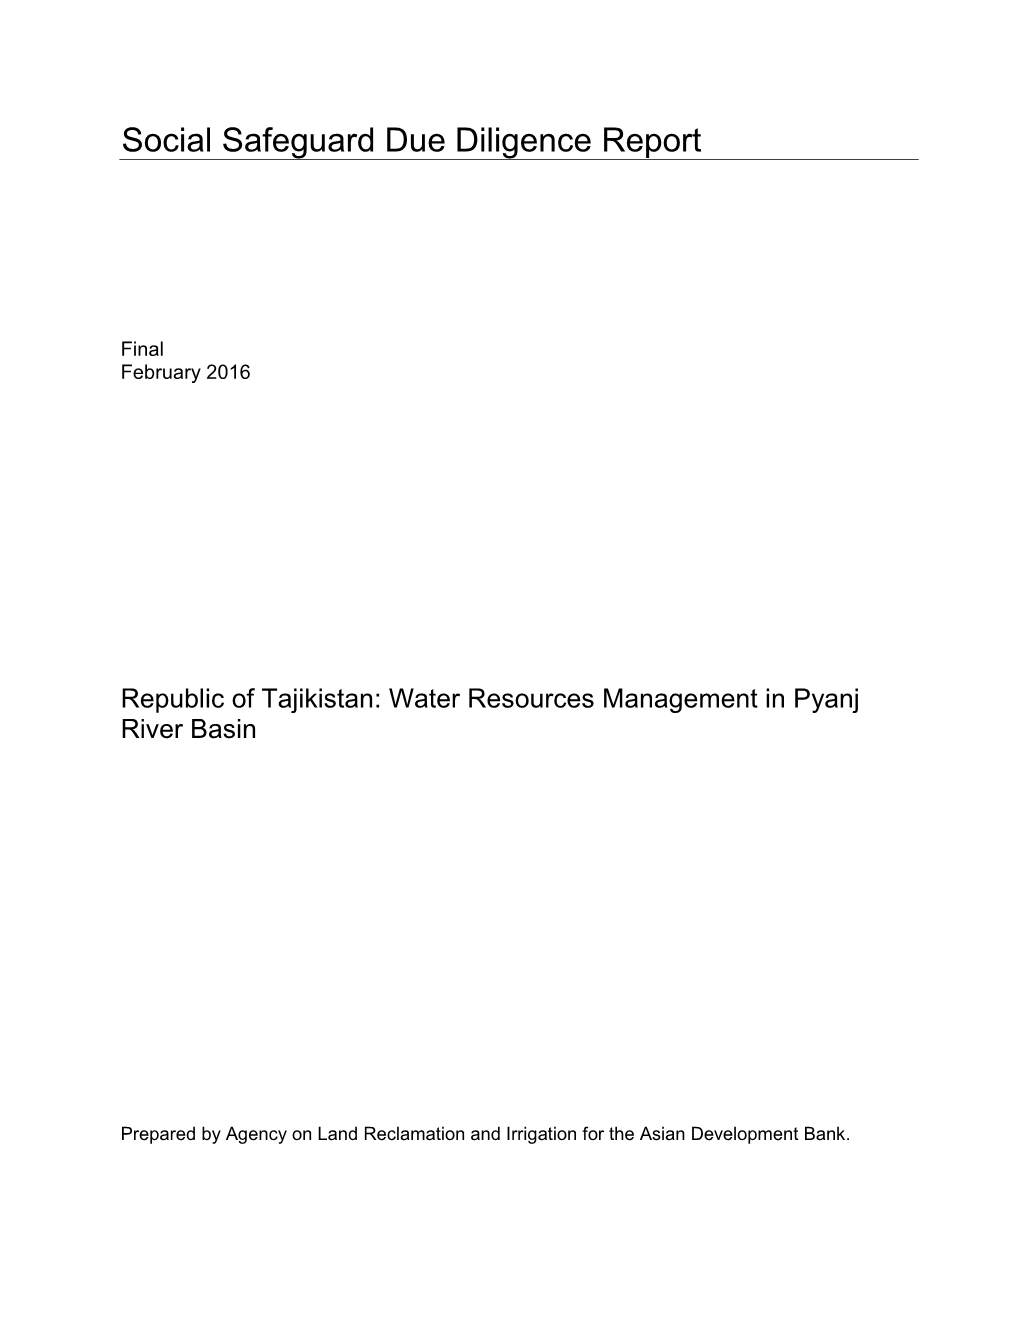 Water Resources Management in Pyanj River Basin: Social Safeguard Due Diligence Report